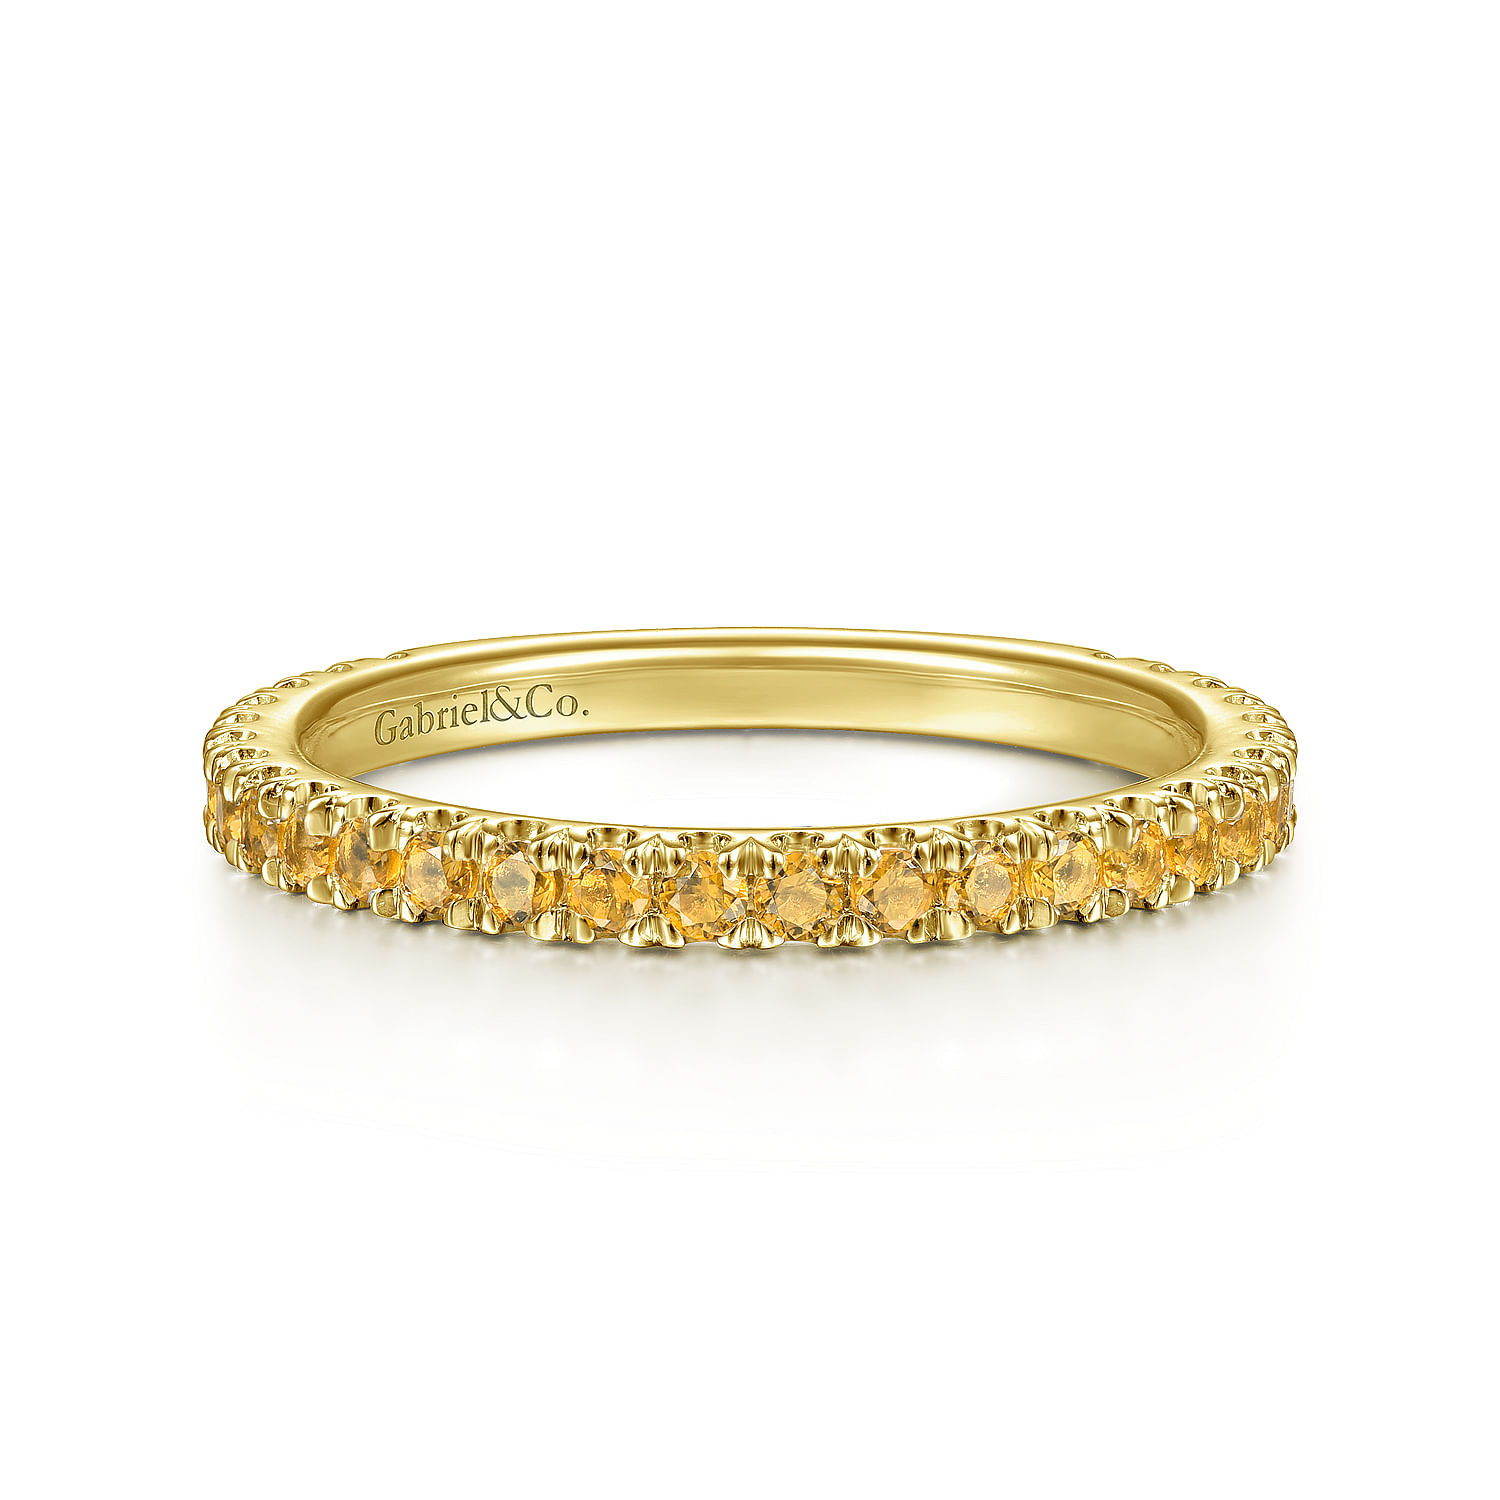 14K Yellow Gold Citrine Stackable Ring